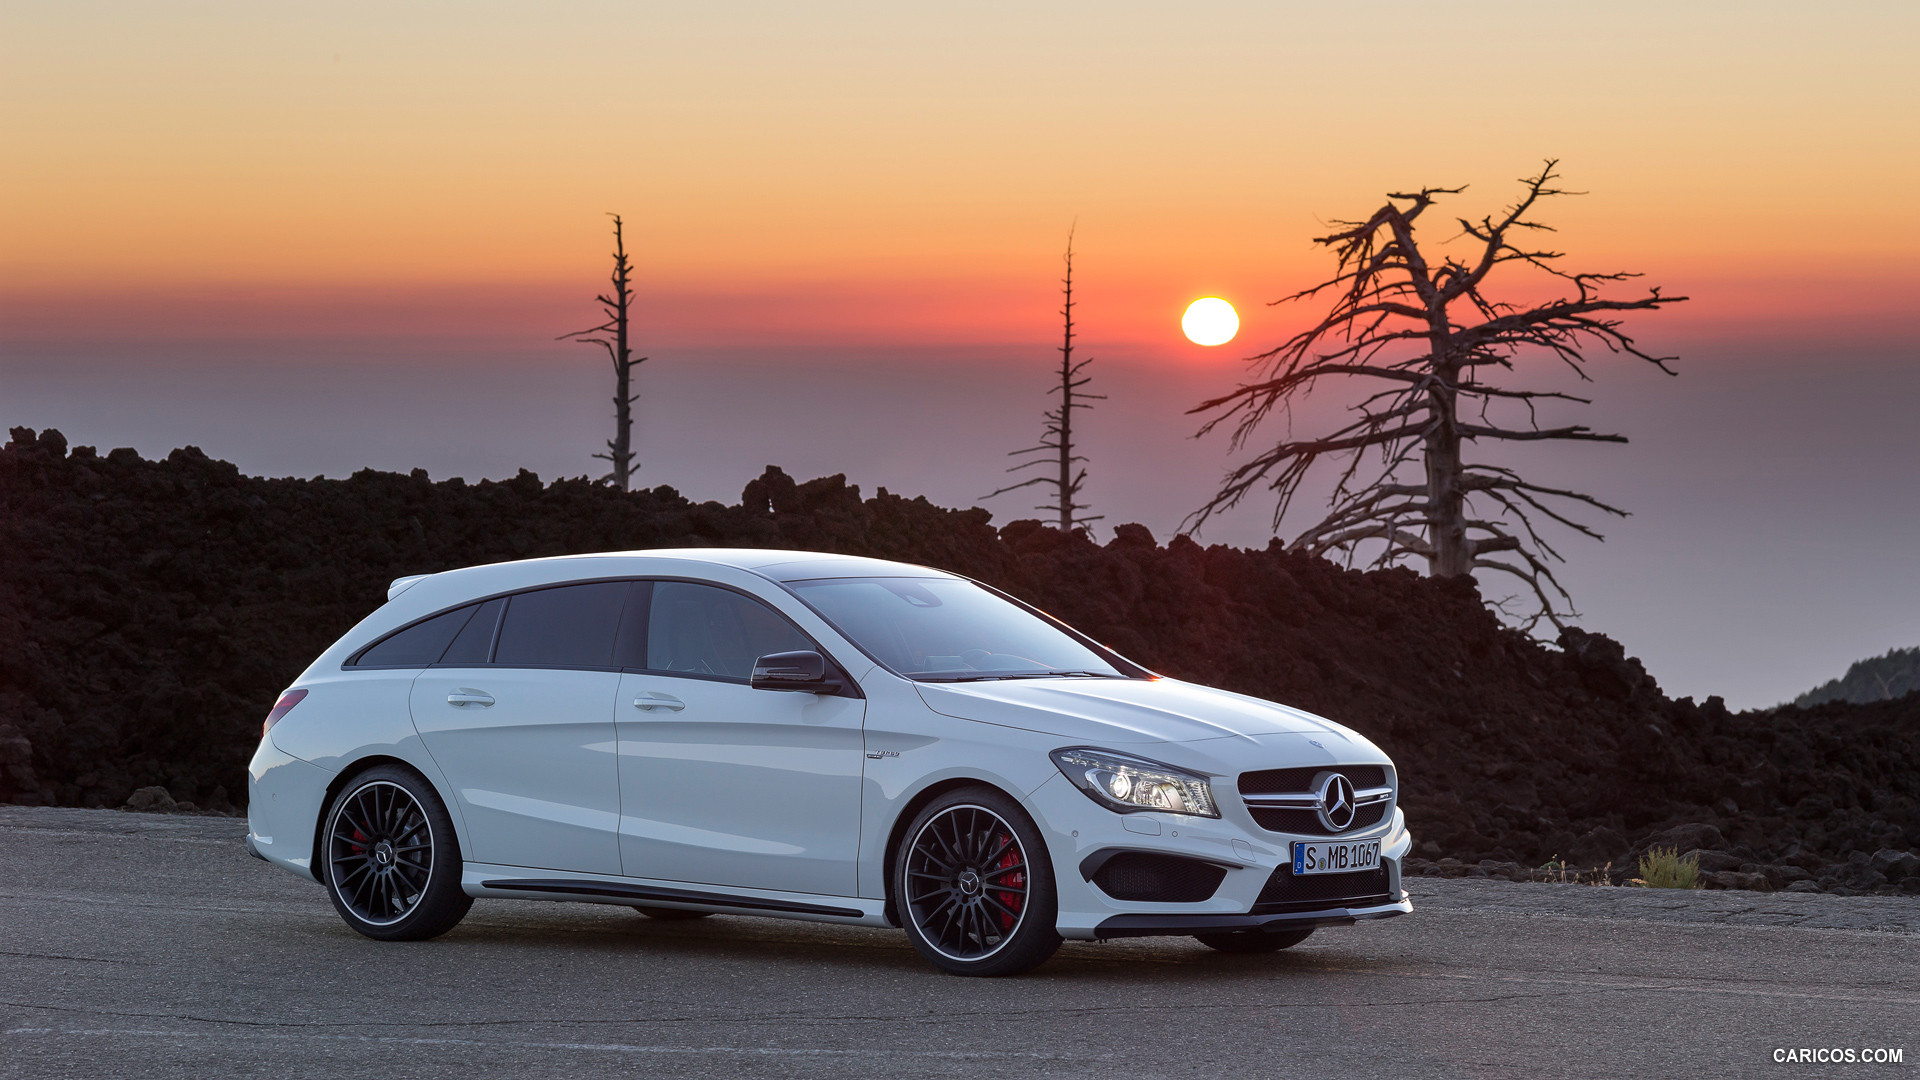 2015 Mercedes-Benz CLA 45 AMG Shooting Brake (Calcite White) - Side, #23 of 70